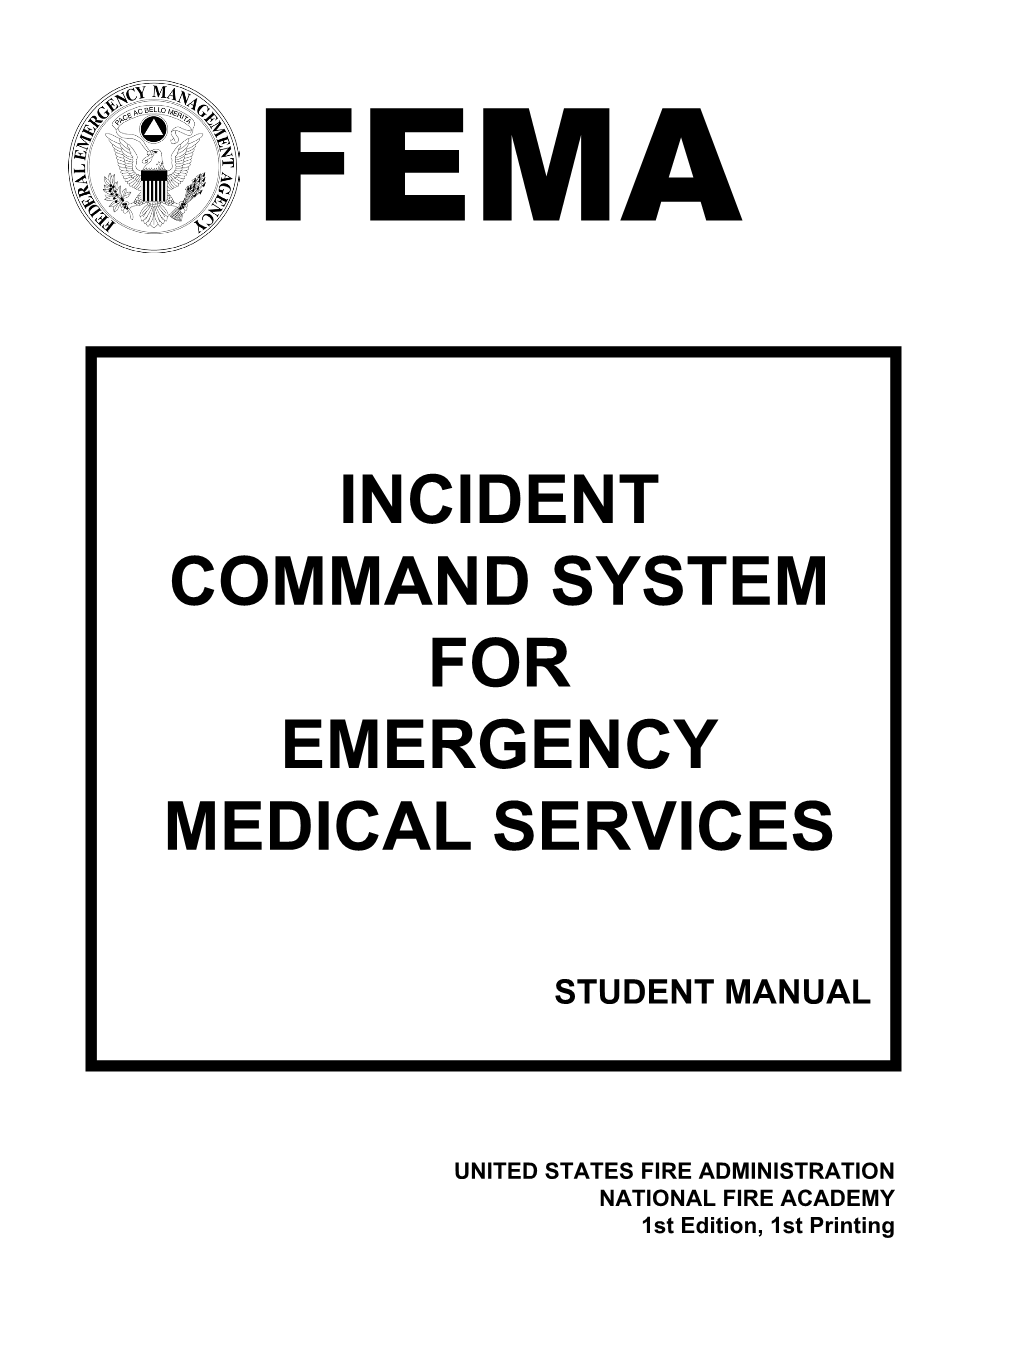 Incident Command System for Emergency Medical Services